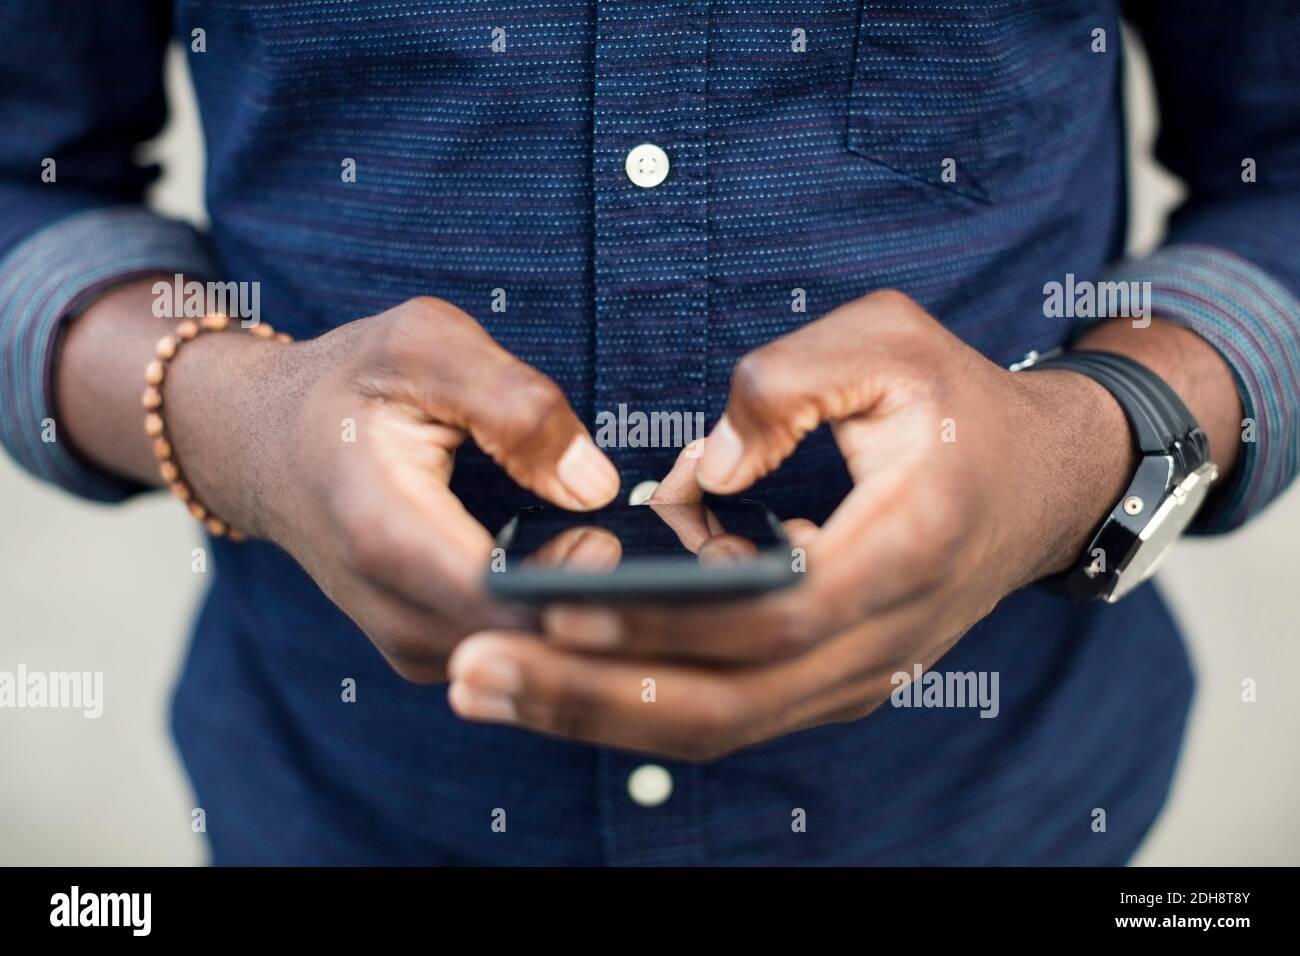 Midsection of man using mobile phone Stock Photo